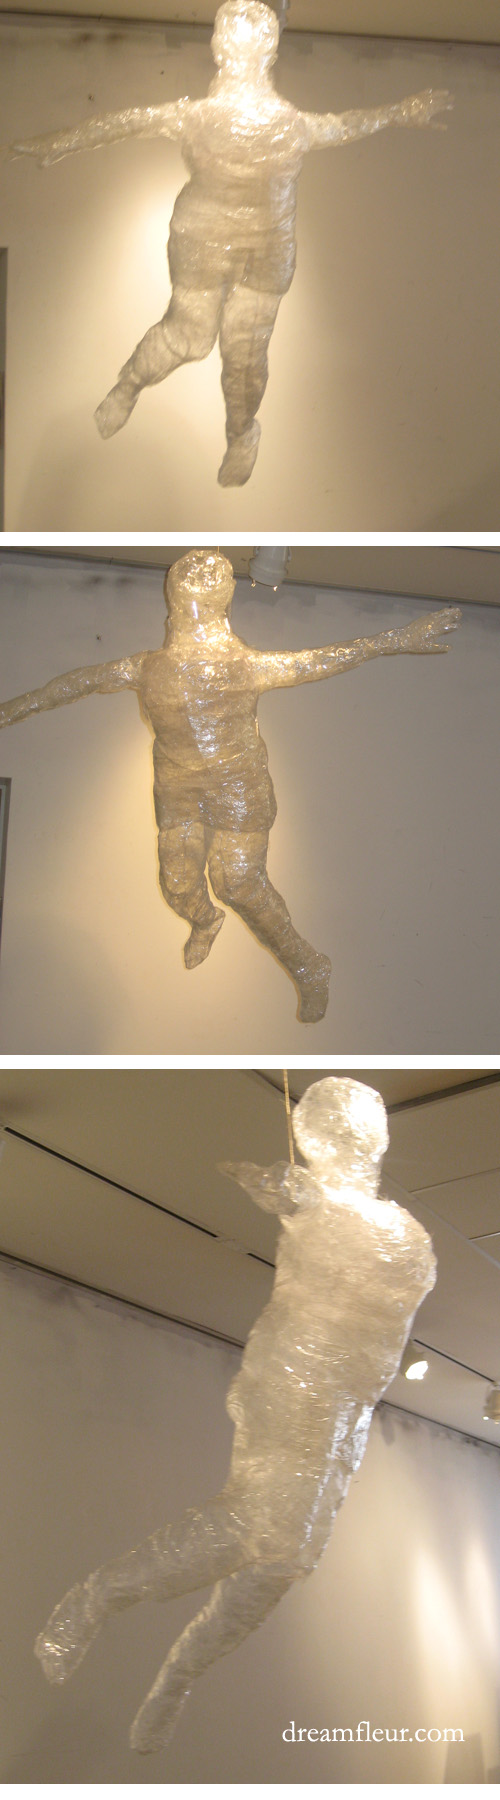 I Can Fly!: My Duct Tape Sculpture